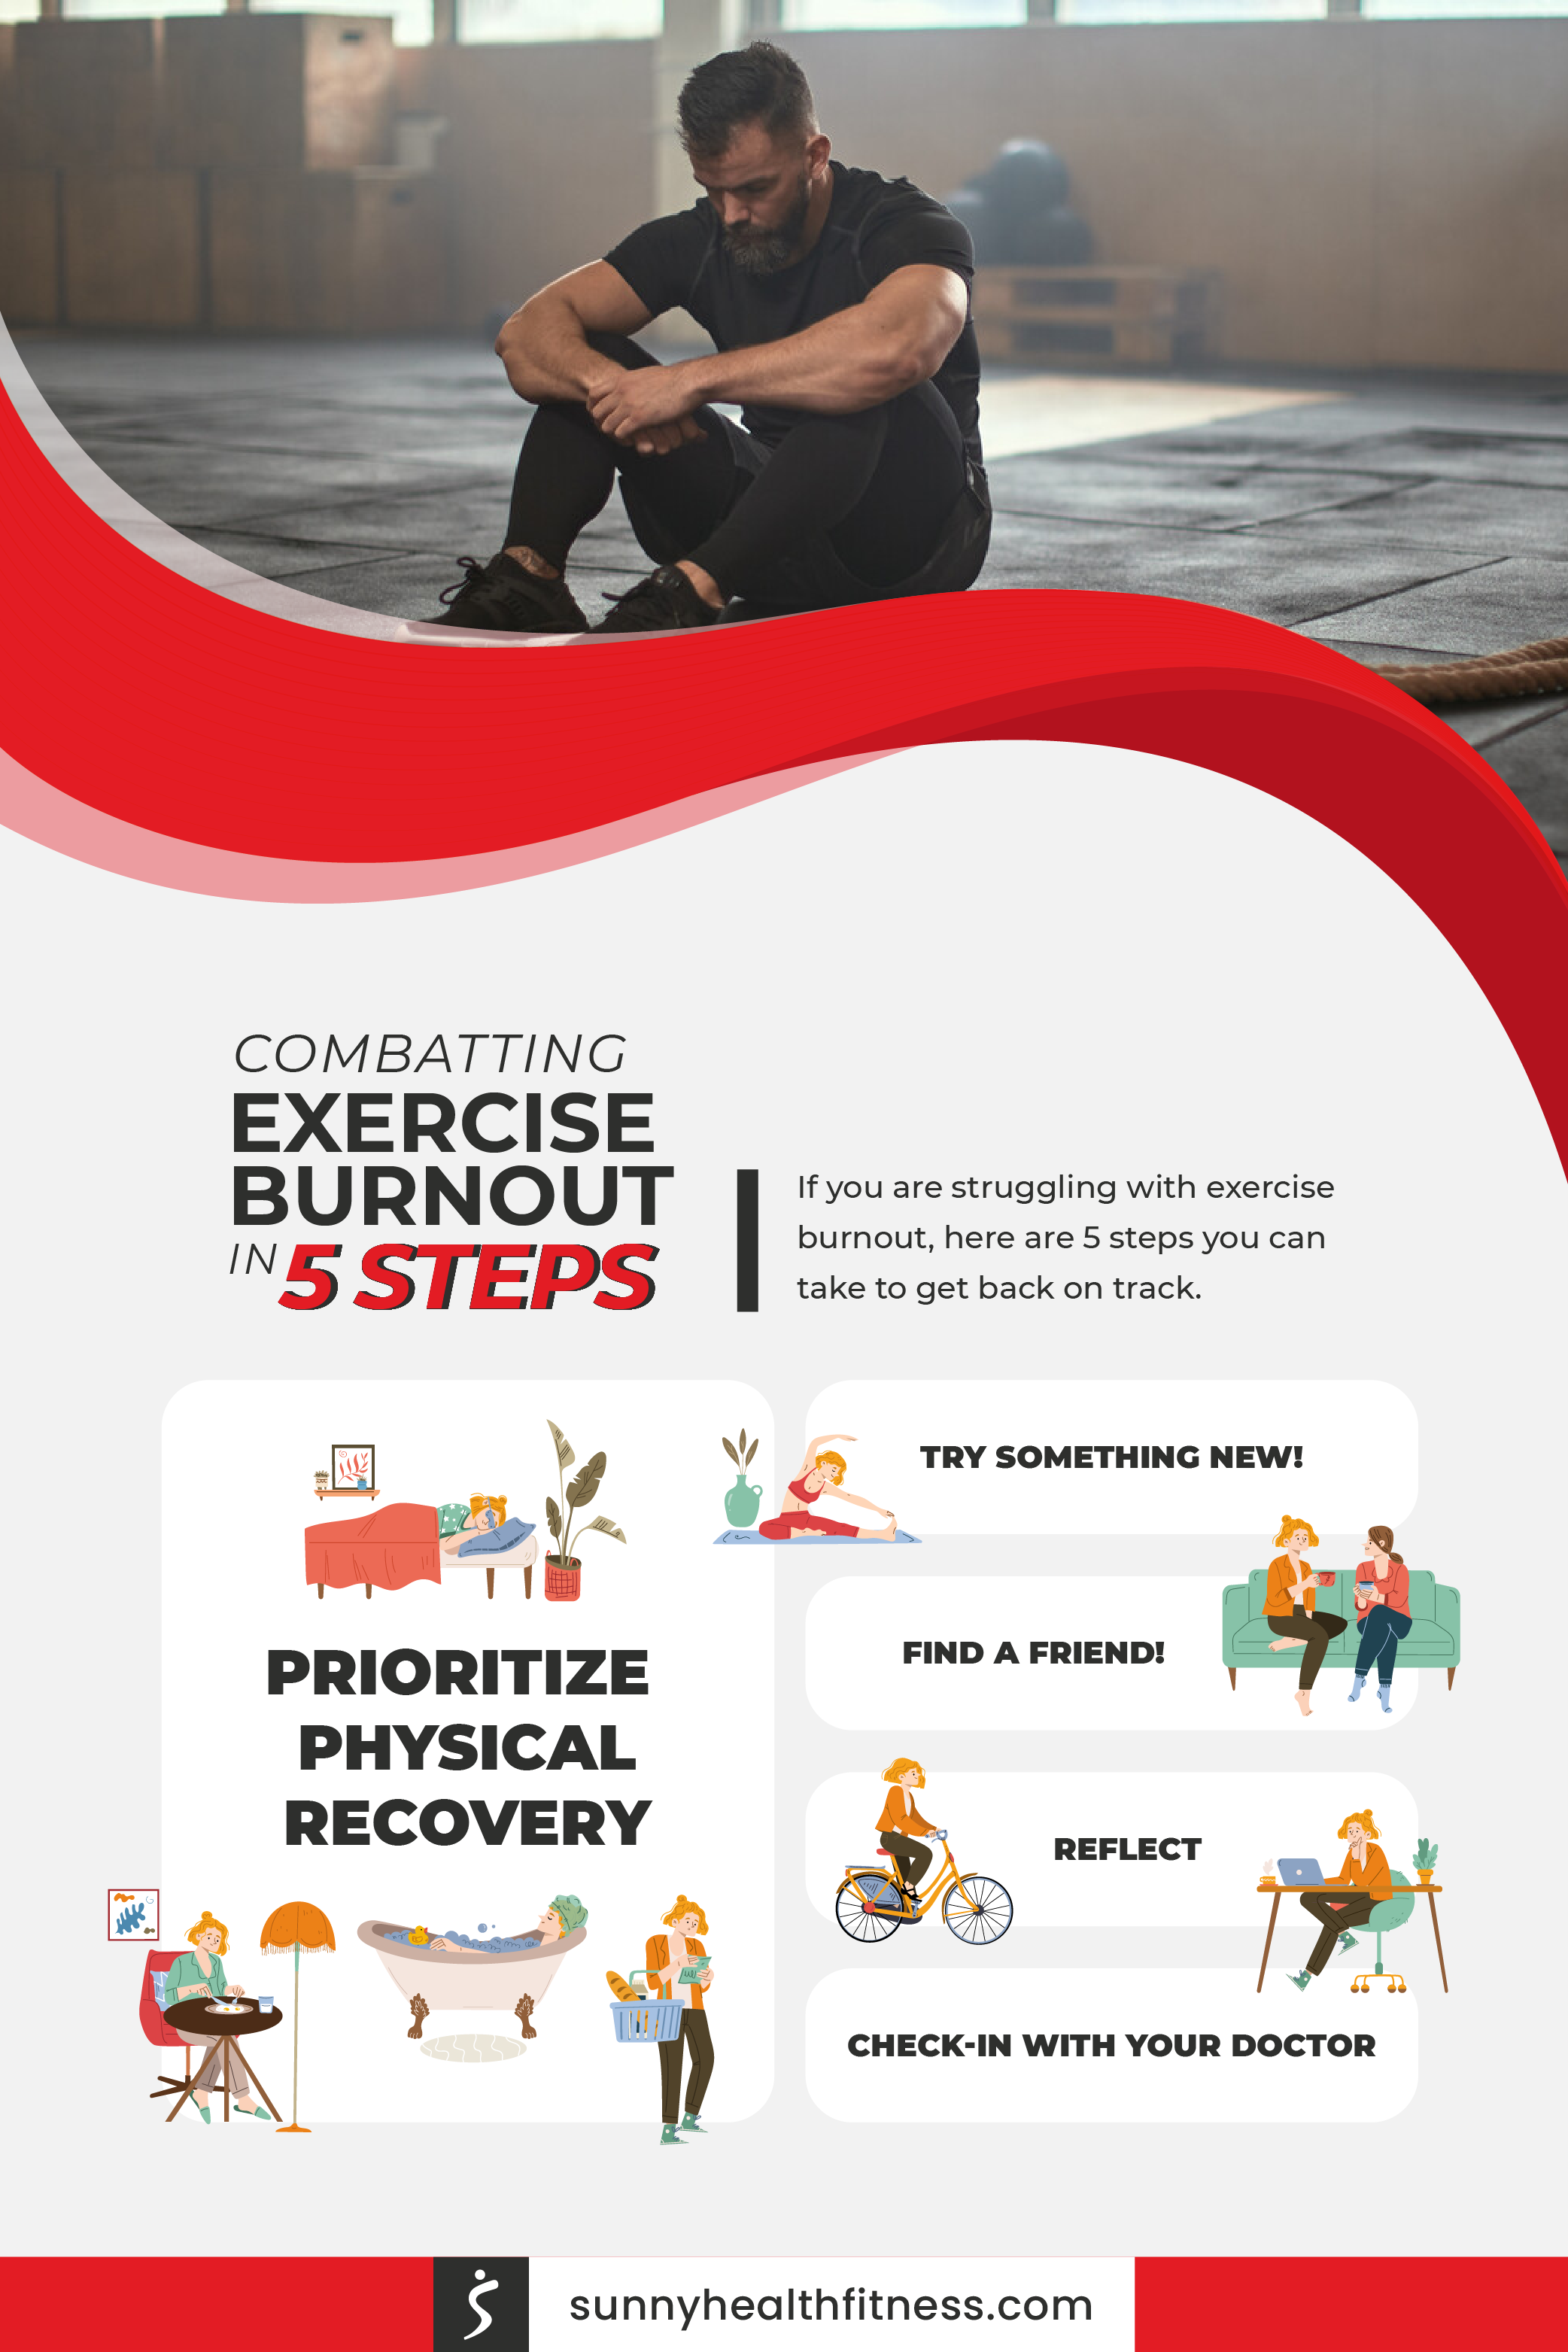 Combatting Exercise Burnout in 5 Steps Infographic